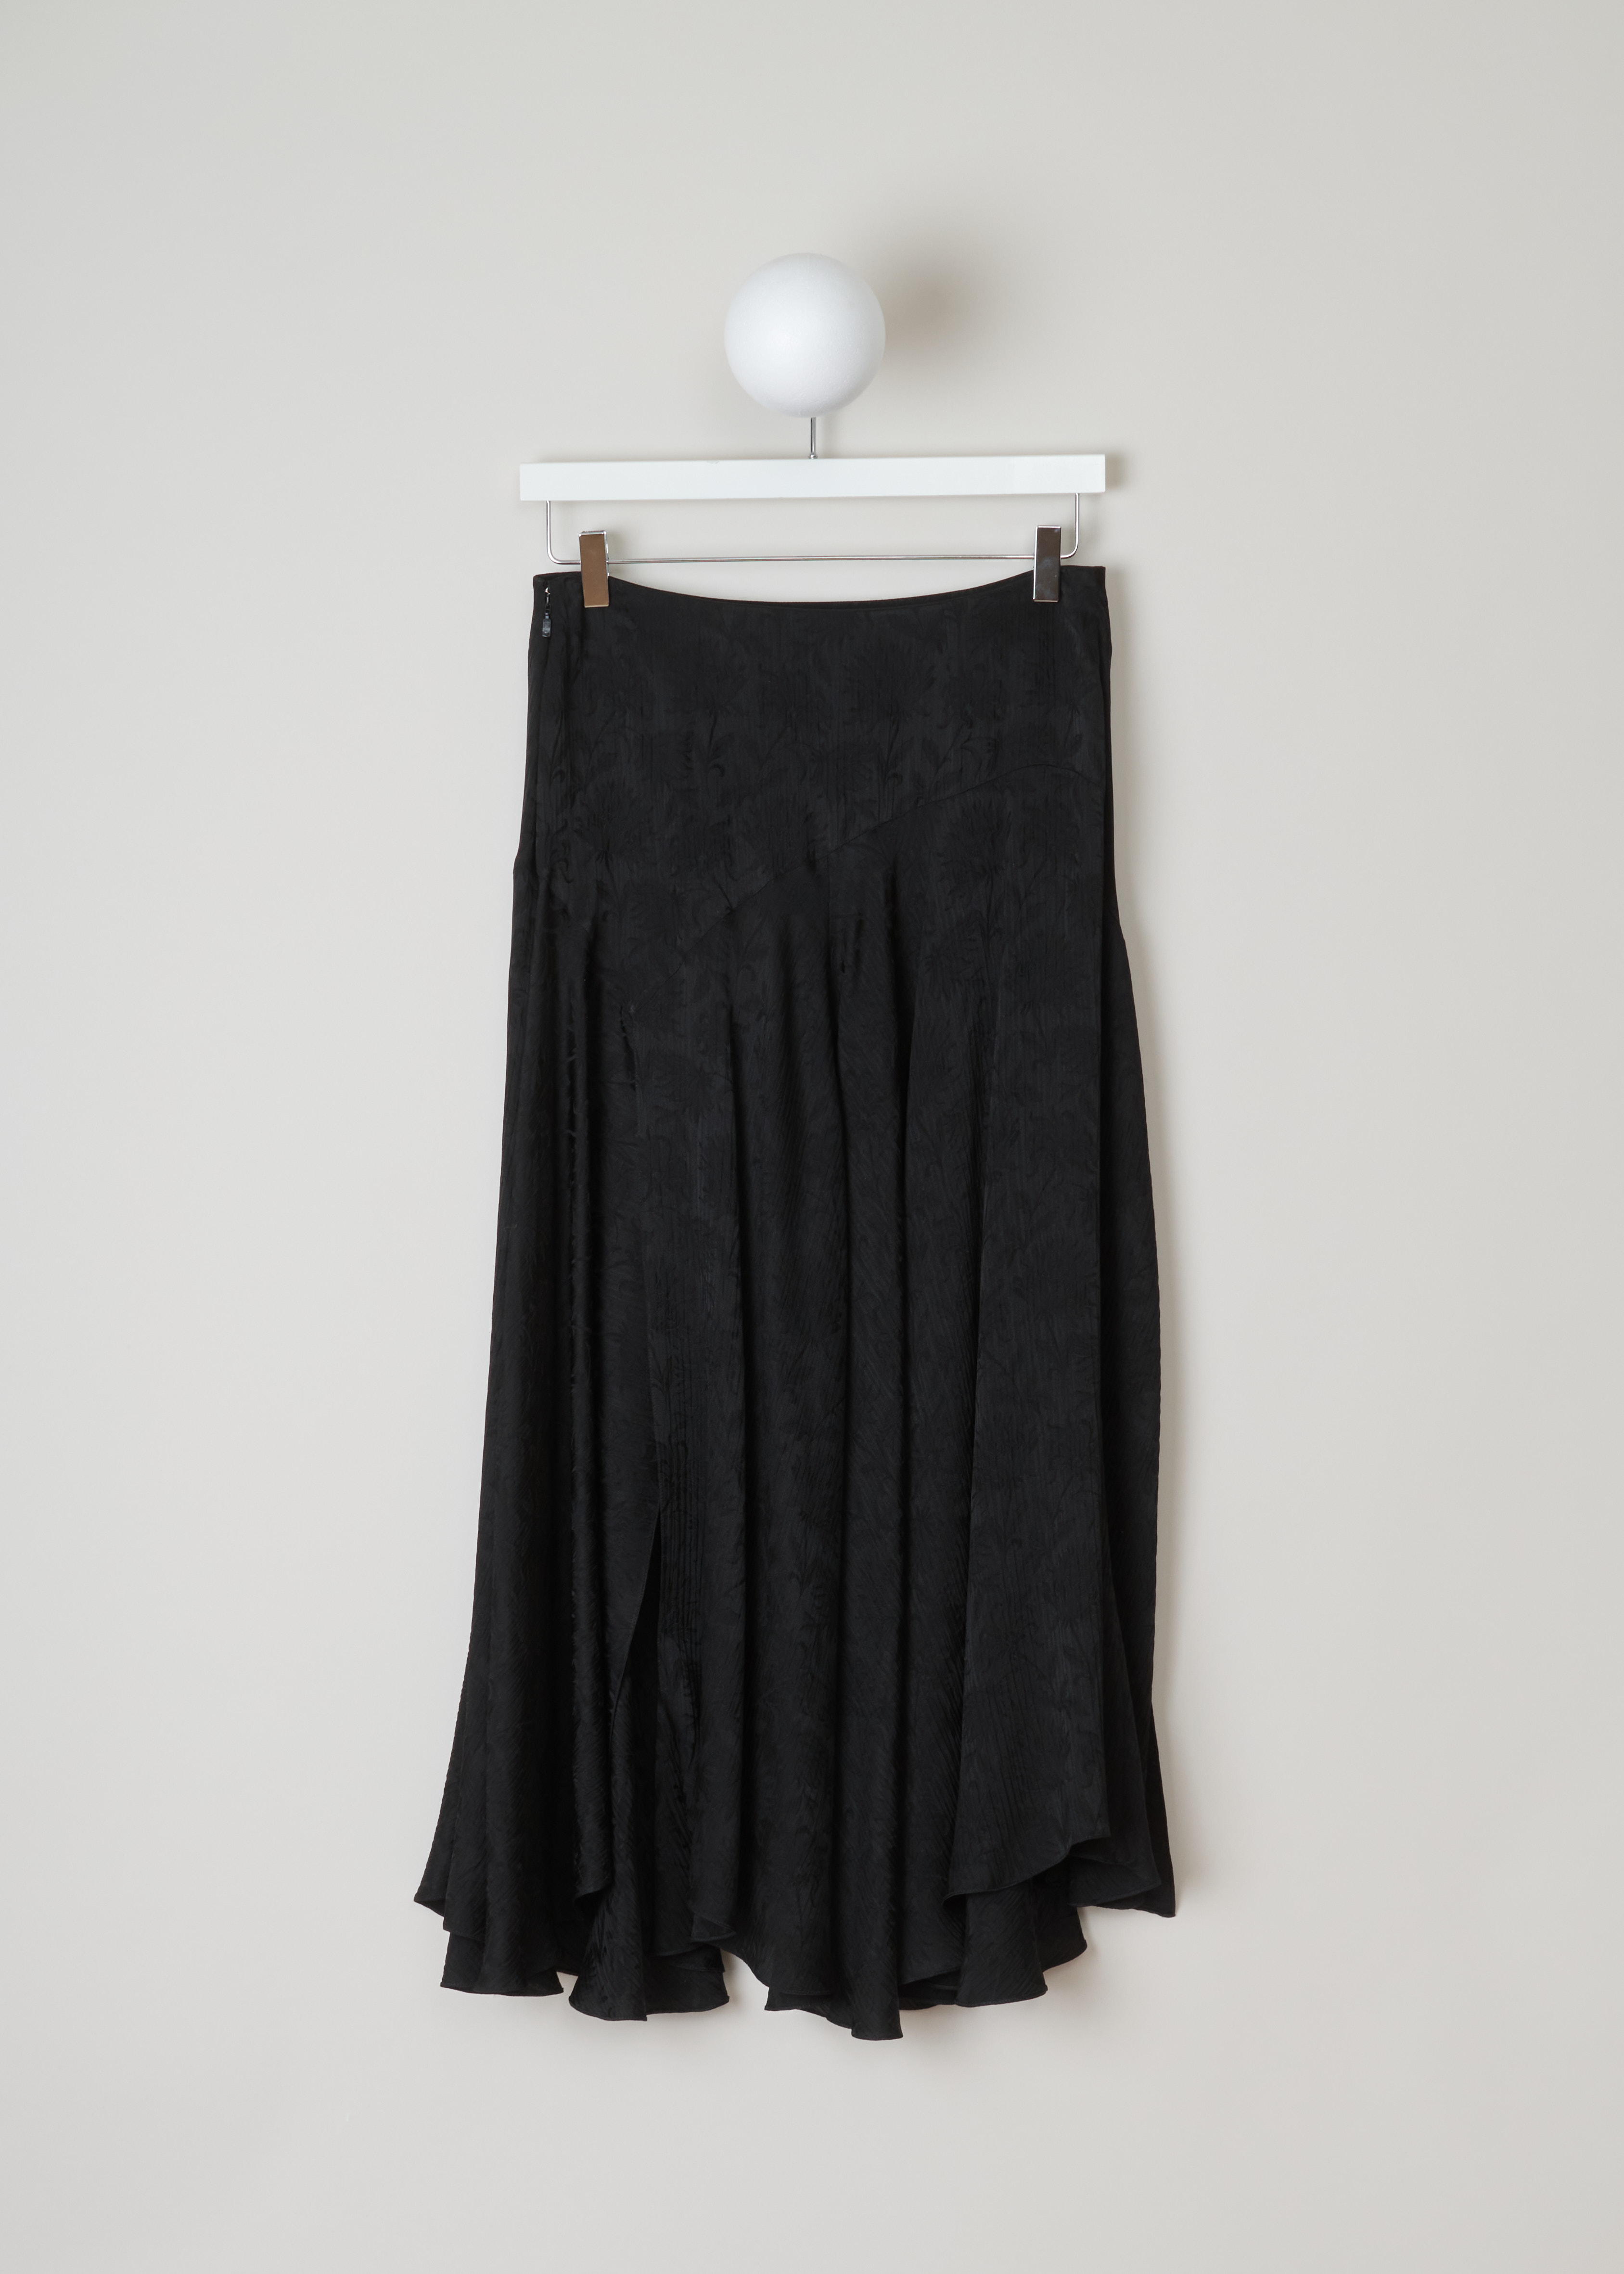 ChloÃ© Silk flower print skirt CHC19AJU14329001_001_Black back. Silk and viscose skirt from creased jacquard fabric with a flower pattern. The skirt features a fitted upper and a flared lower section to create an elegant, flowing silhouette. 